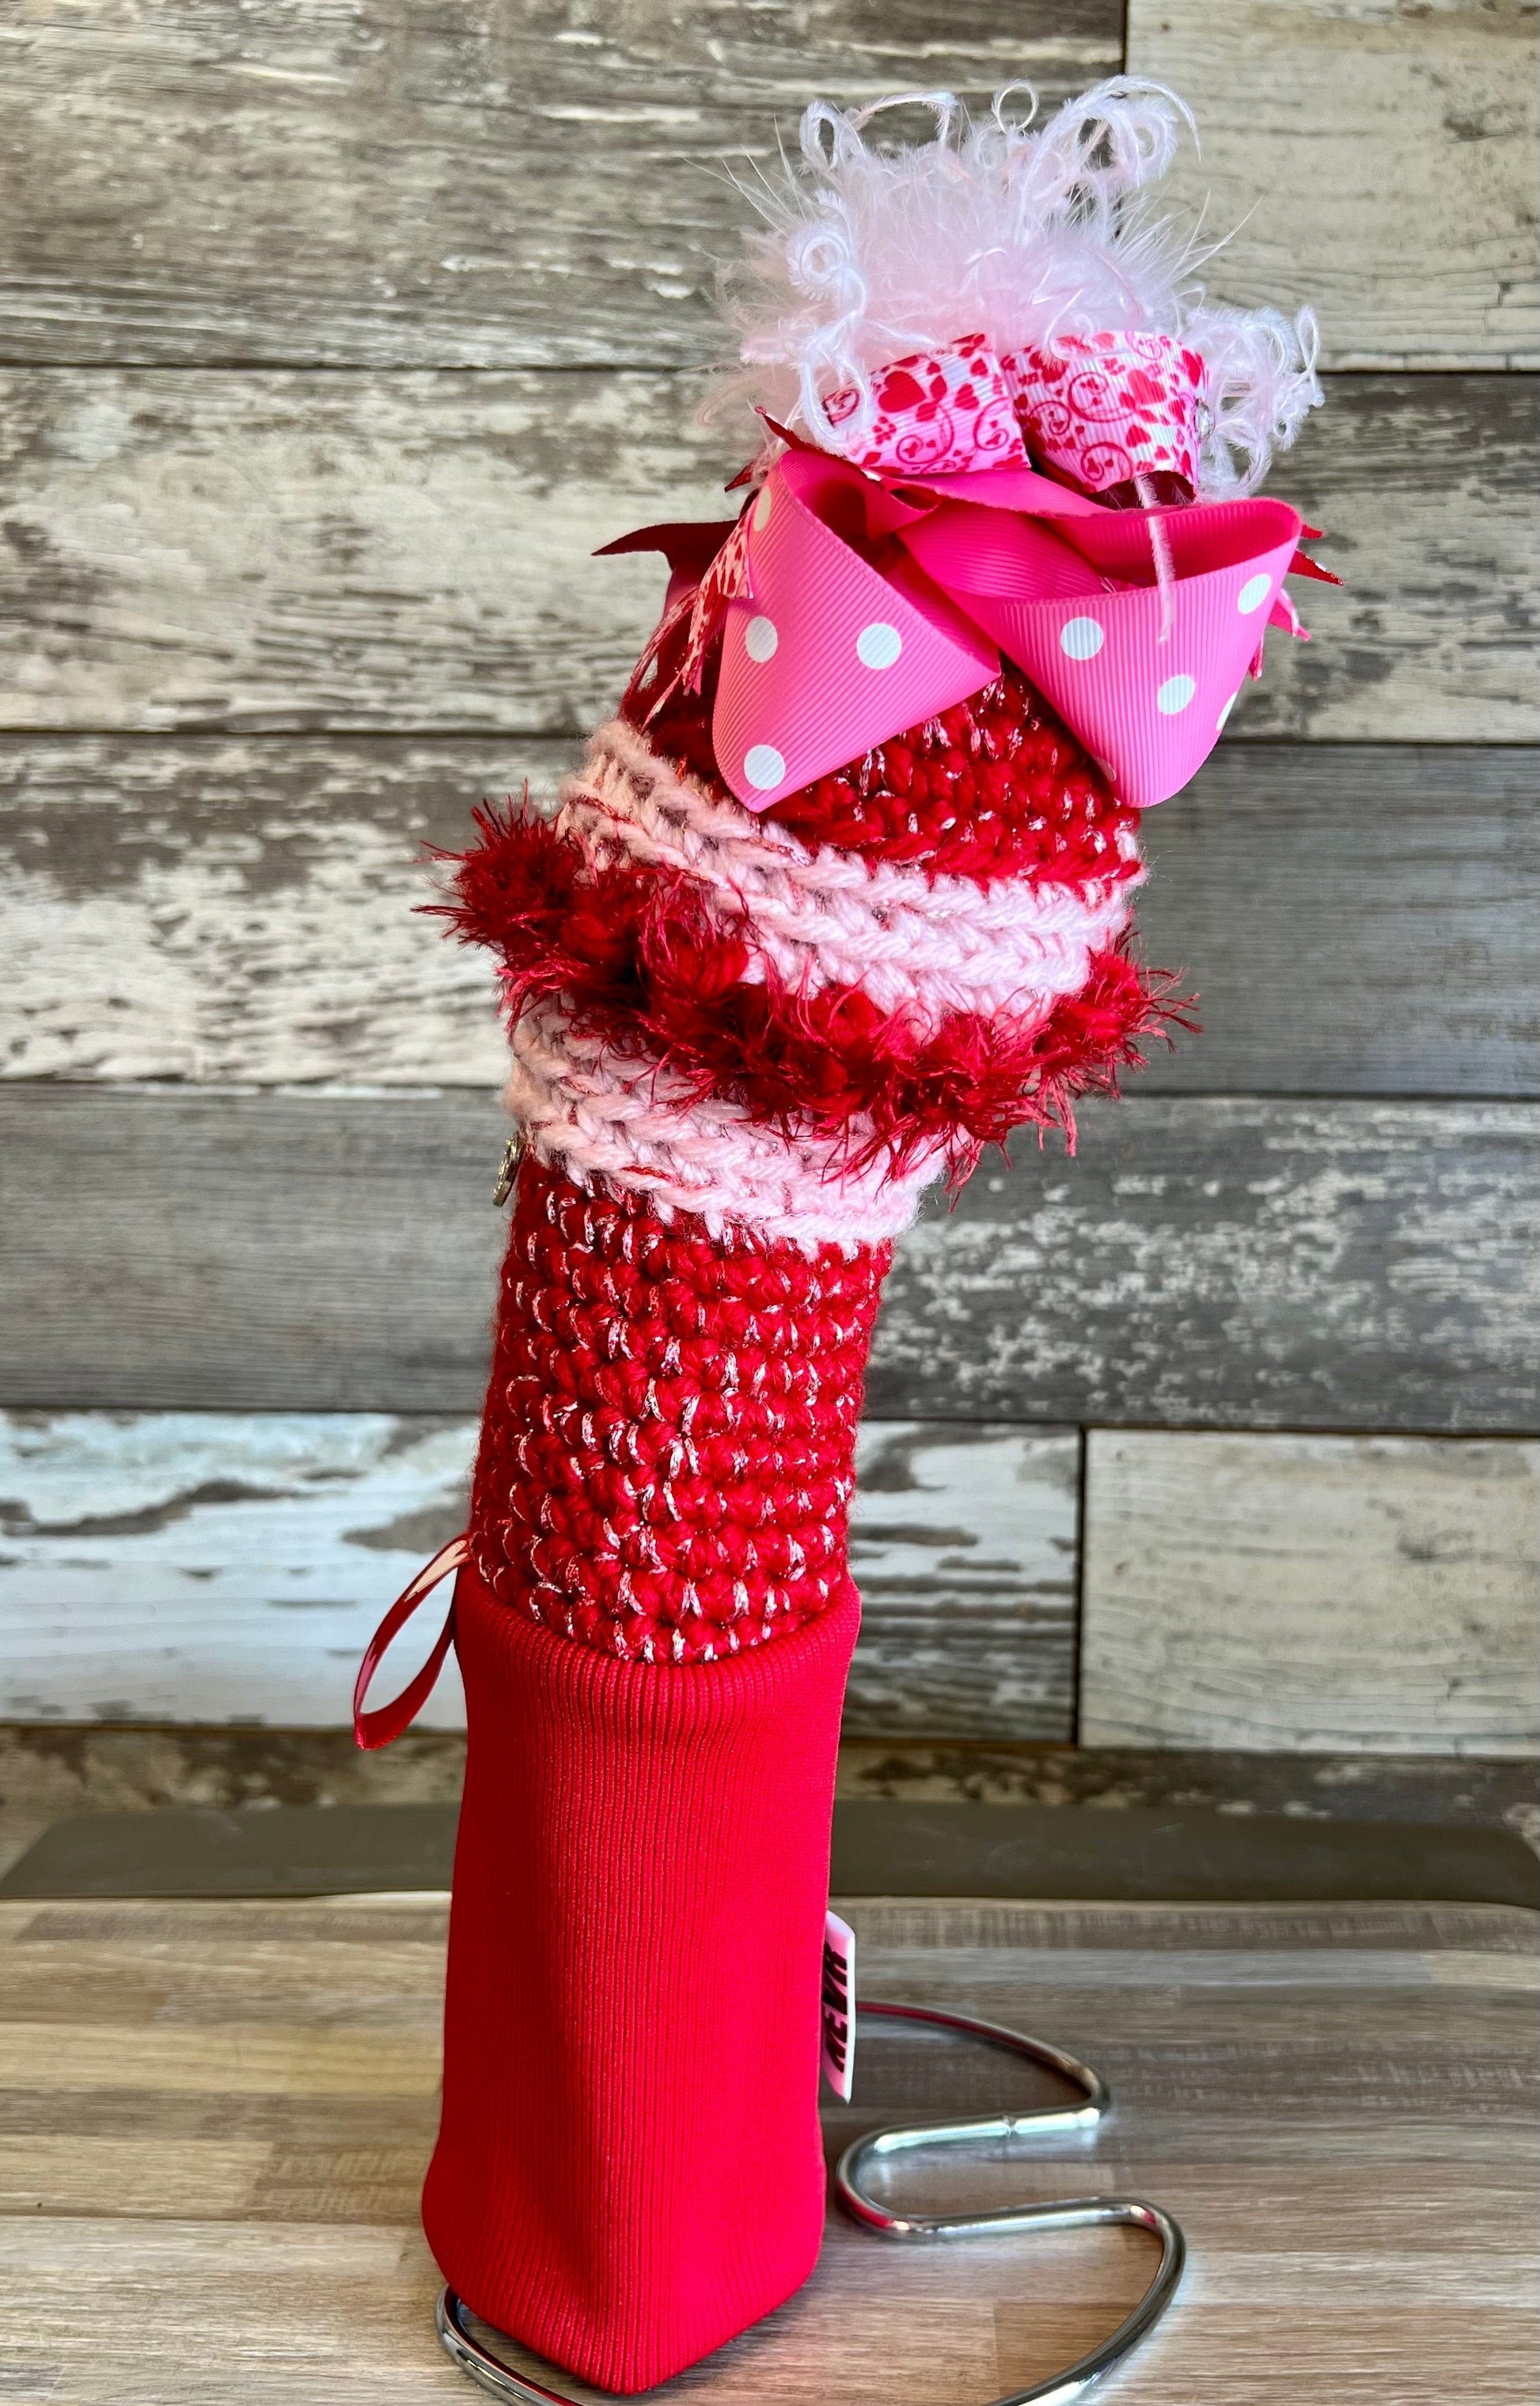 Handcrafted Dream lover headcovers